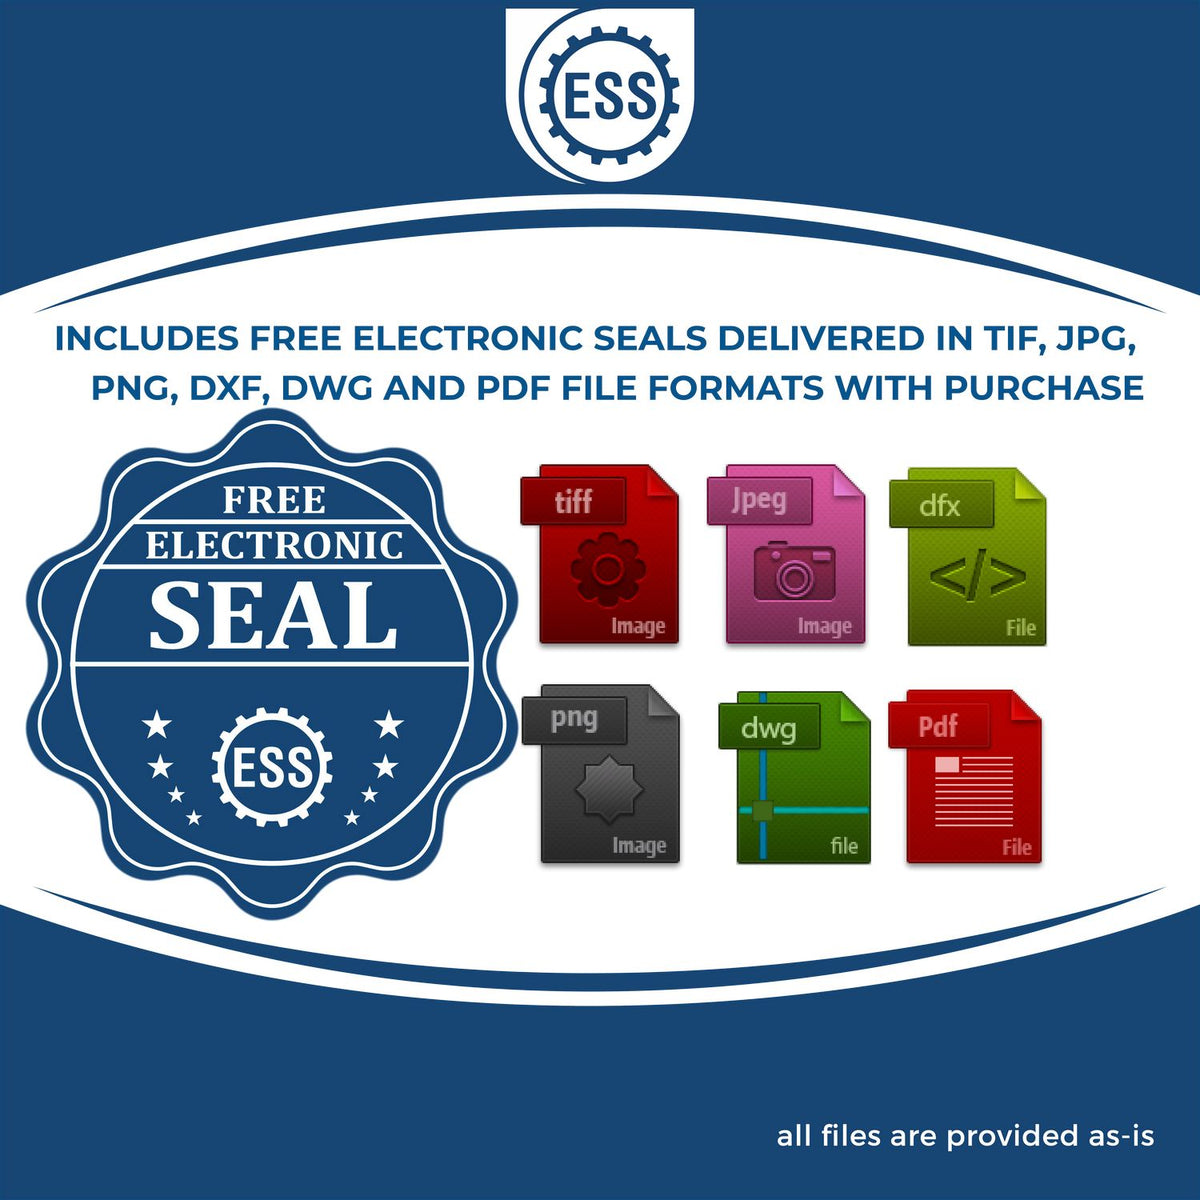 An infographic for the free electronic seal for the Hybrid Louisiana Geologist Seal illustrating the different file type icons such as DXF, DWG, TIF, JPG and PNG.